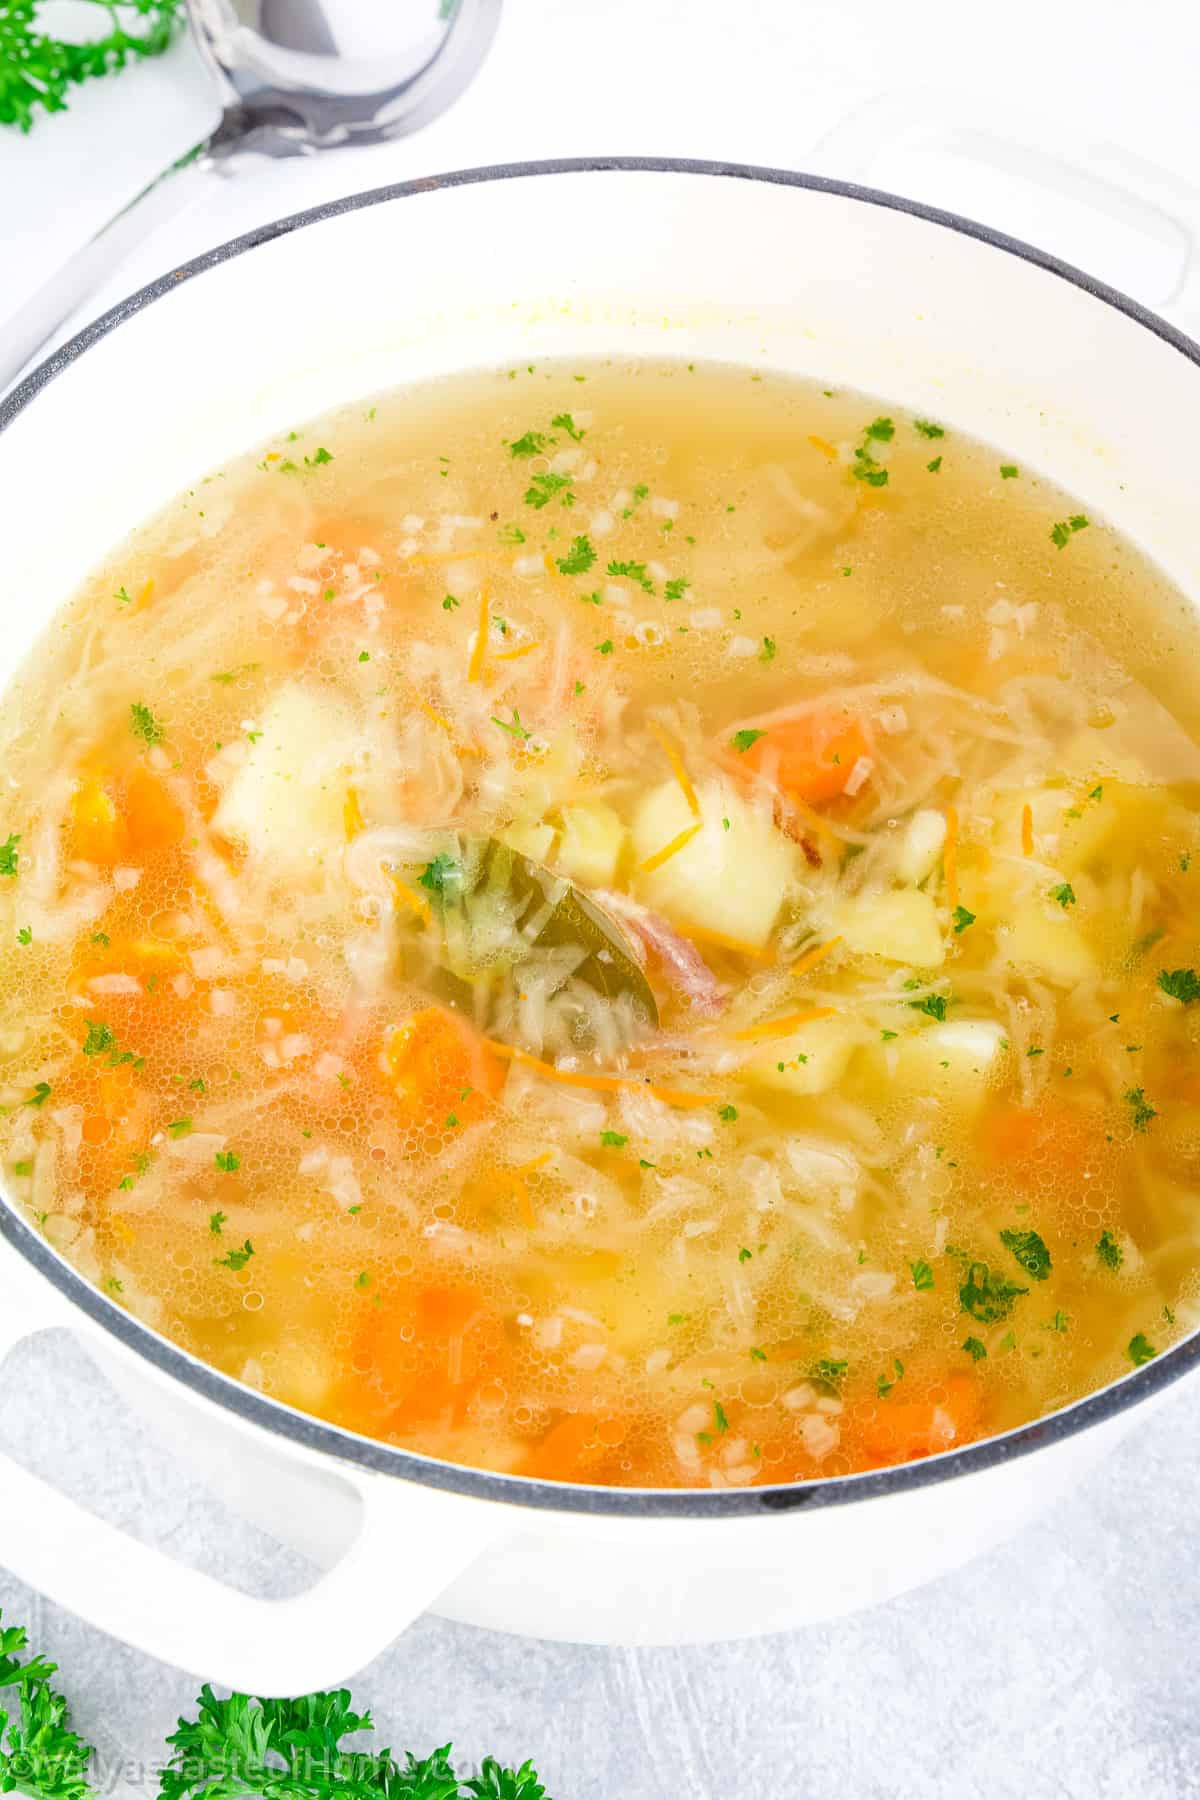 Ukrainian sauerkraut soup, or Kapusniak, is a rich and flavorful dish deeply rooted in both taste and tradition.